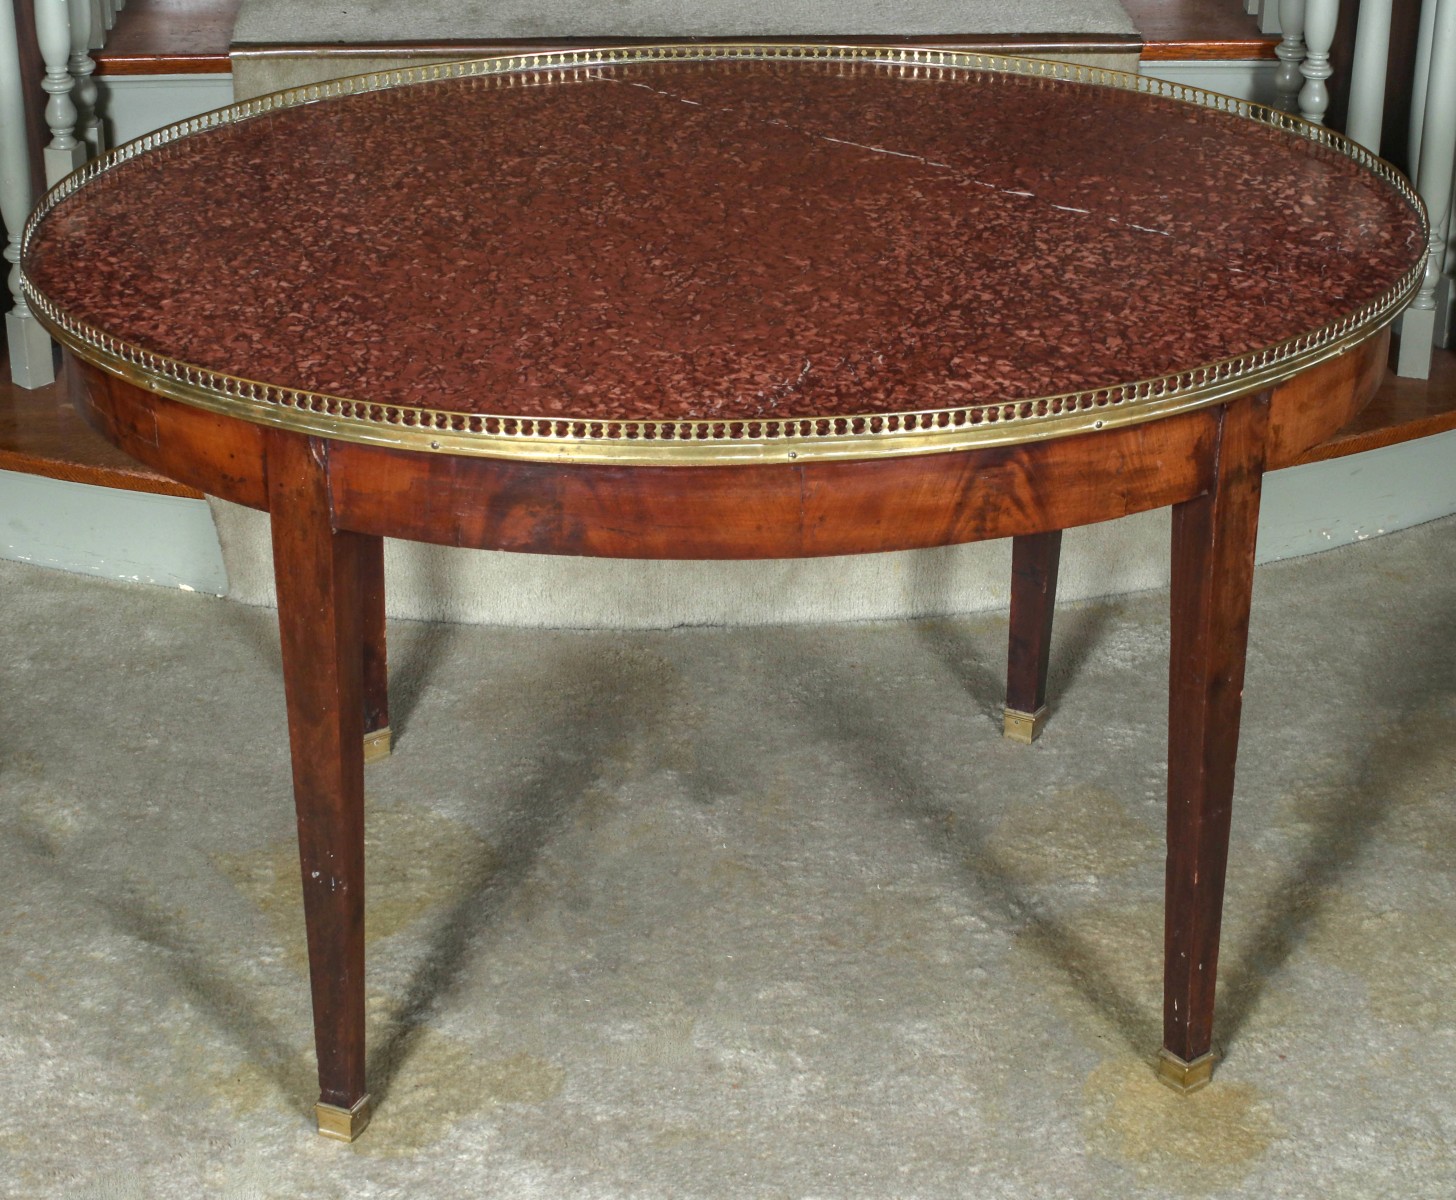 AN EARLY 19TH CENTURY FRENCH MARBLE TOP CENTER TABLE